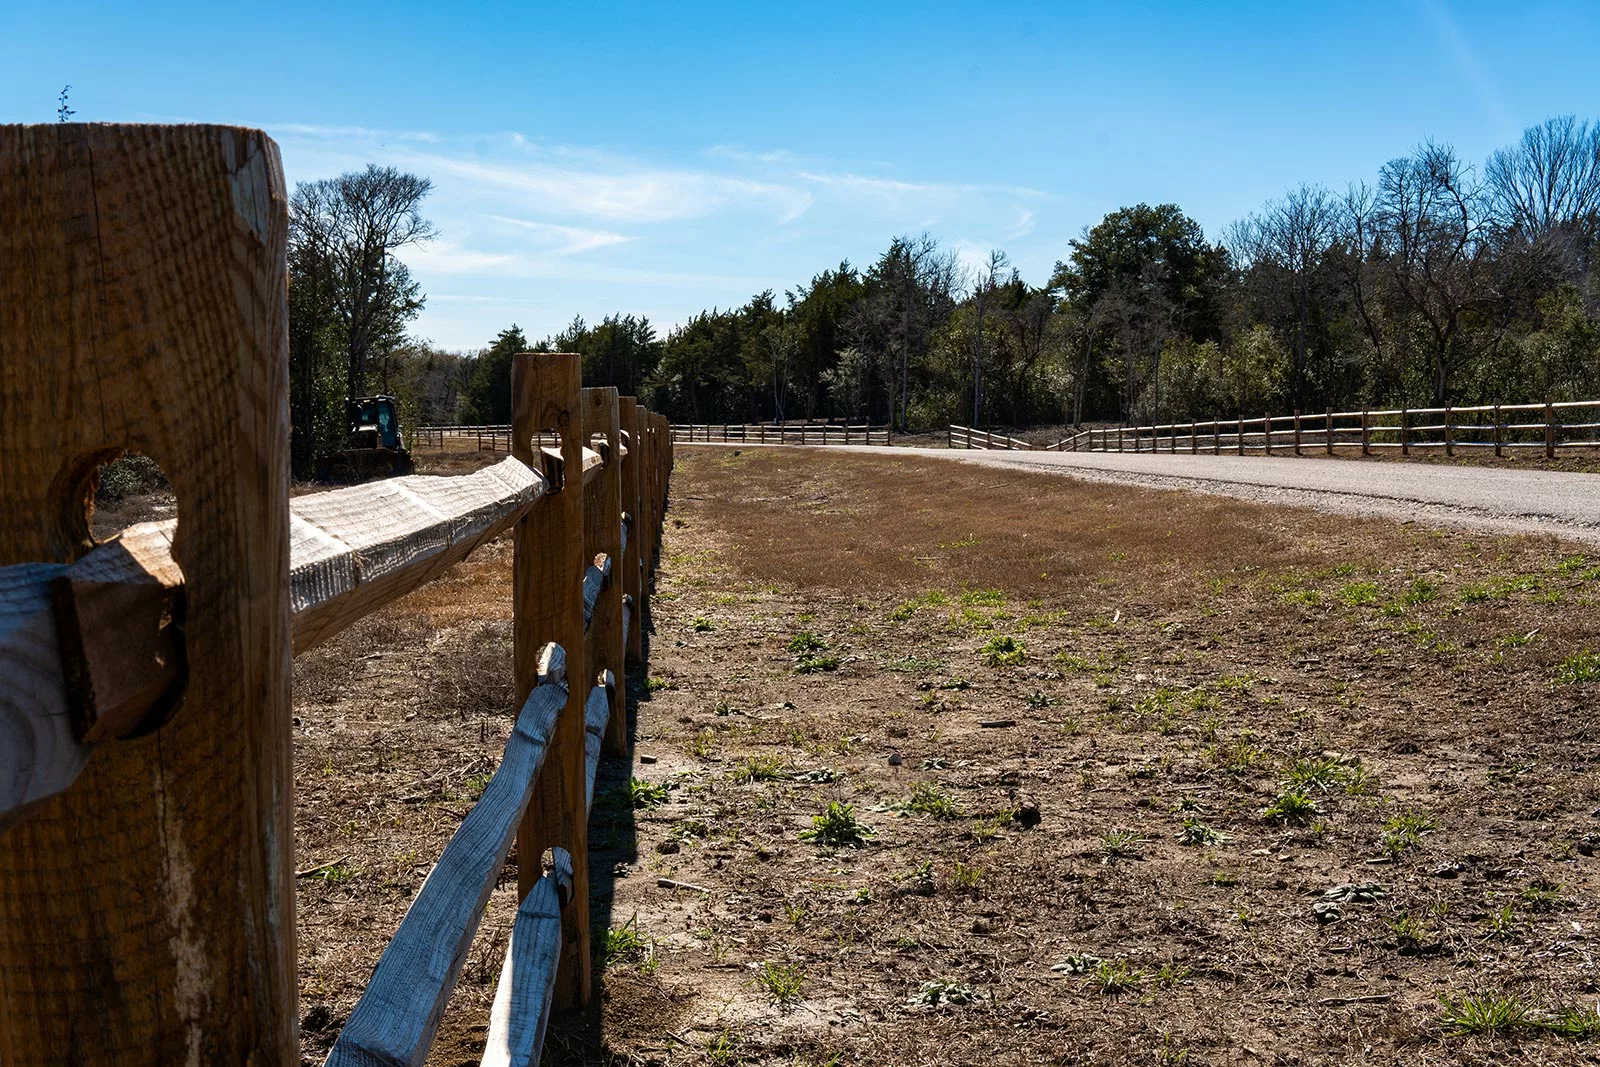 The fencing that is part of the Timber Bridge Community. Containing land for sale in Texas.